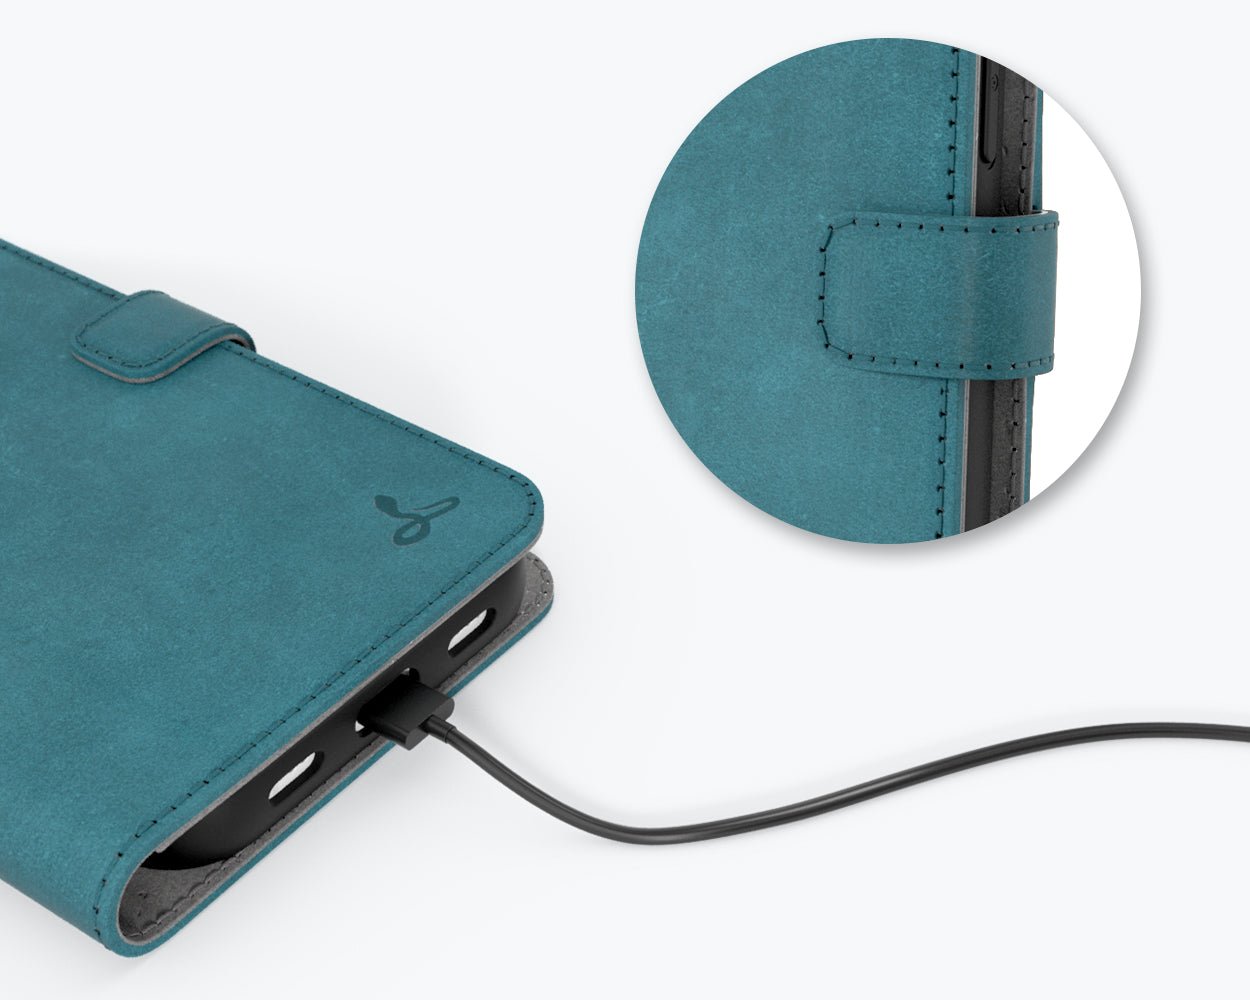 Apple iPhone 13 Pro - Vintage Leather Wallet Teal Apple iPhone 13 Pro - Snakehive UK